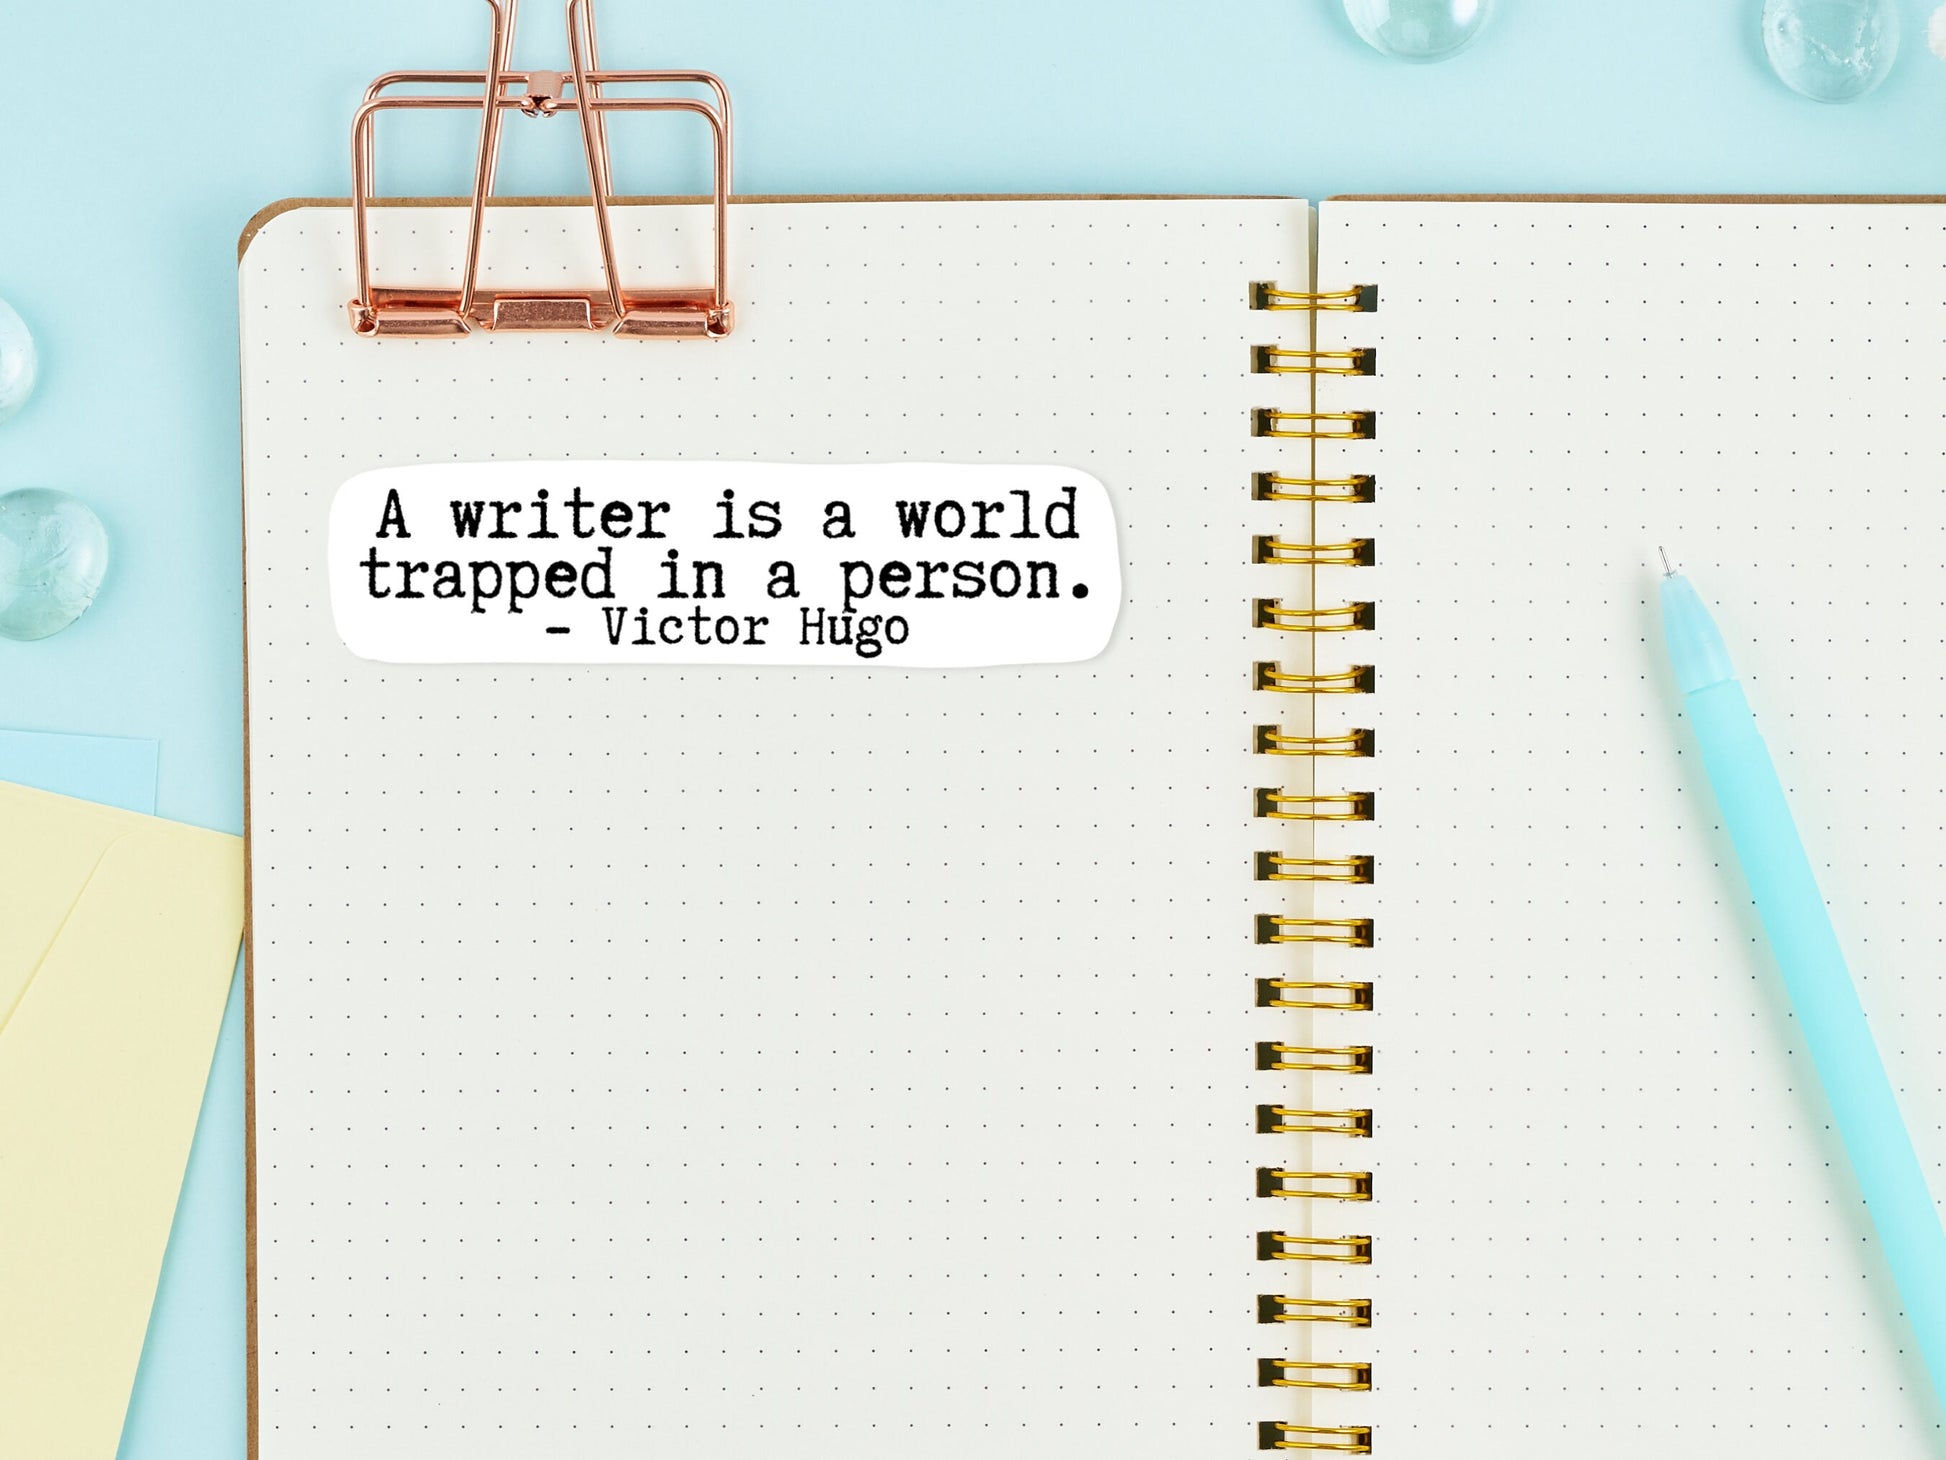 A Writer Is A World Trapped In A Person Sticker, Writer Gifts